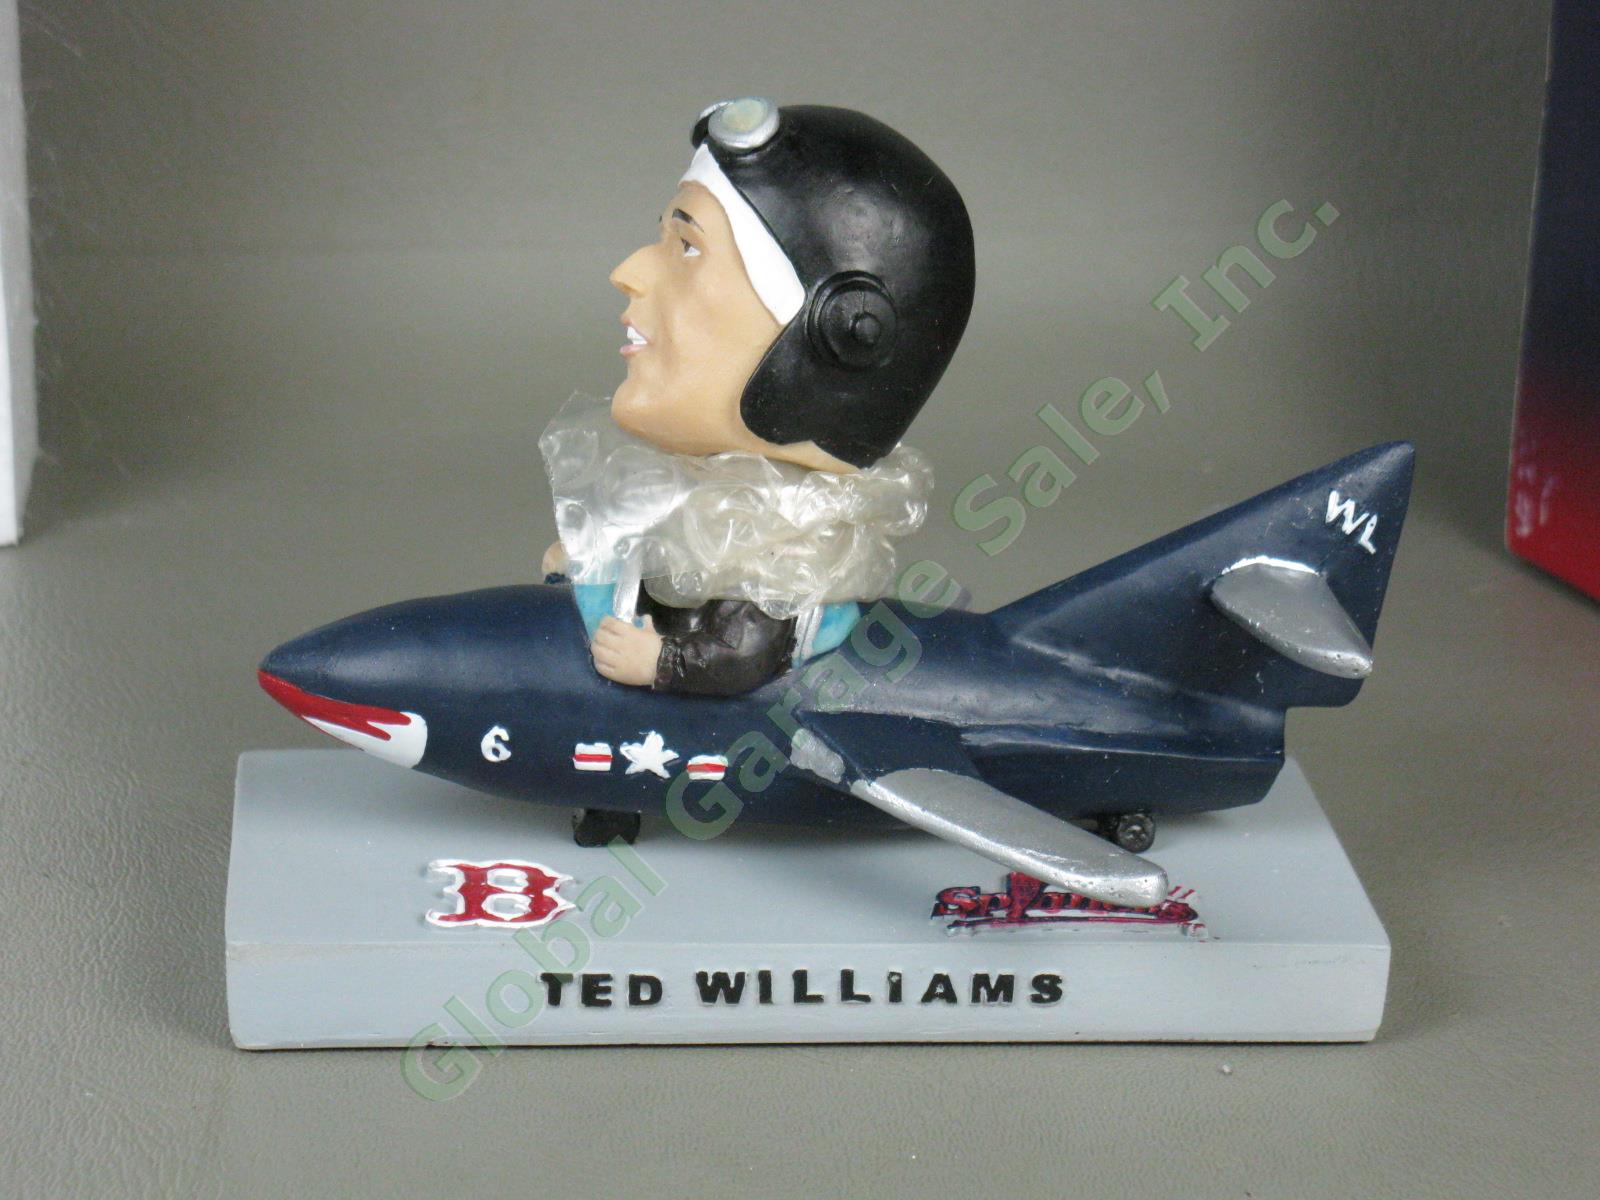 Rare NIB Ted Williams Lowell Spinners Red Sox WWII Jet Pilot Bobblehead 7/1/2008 1